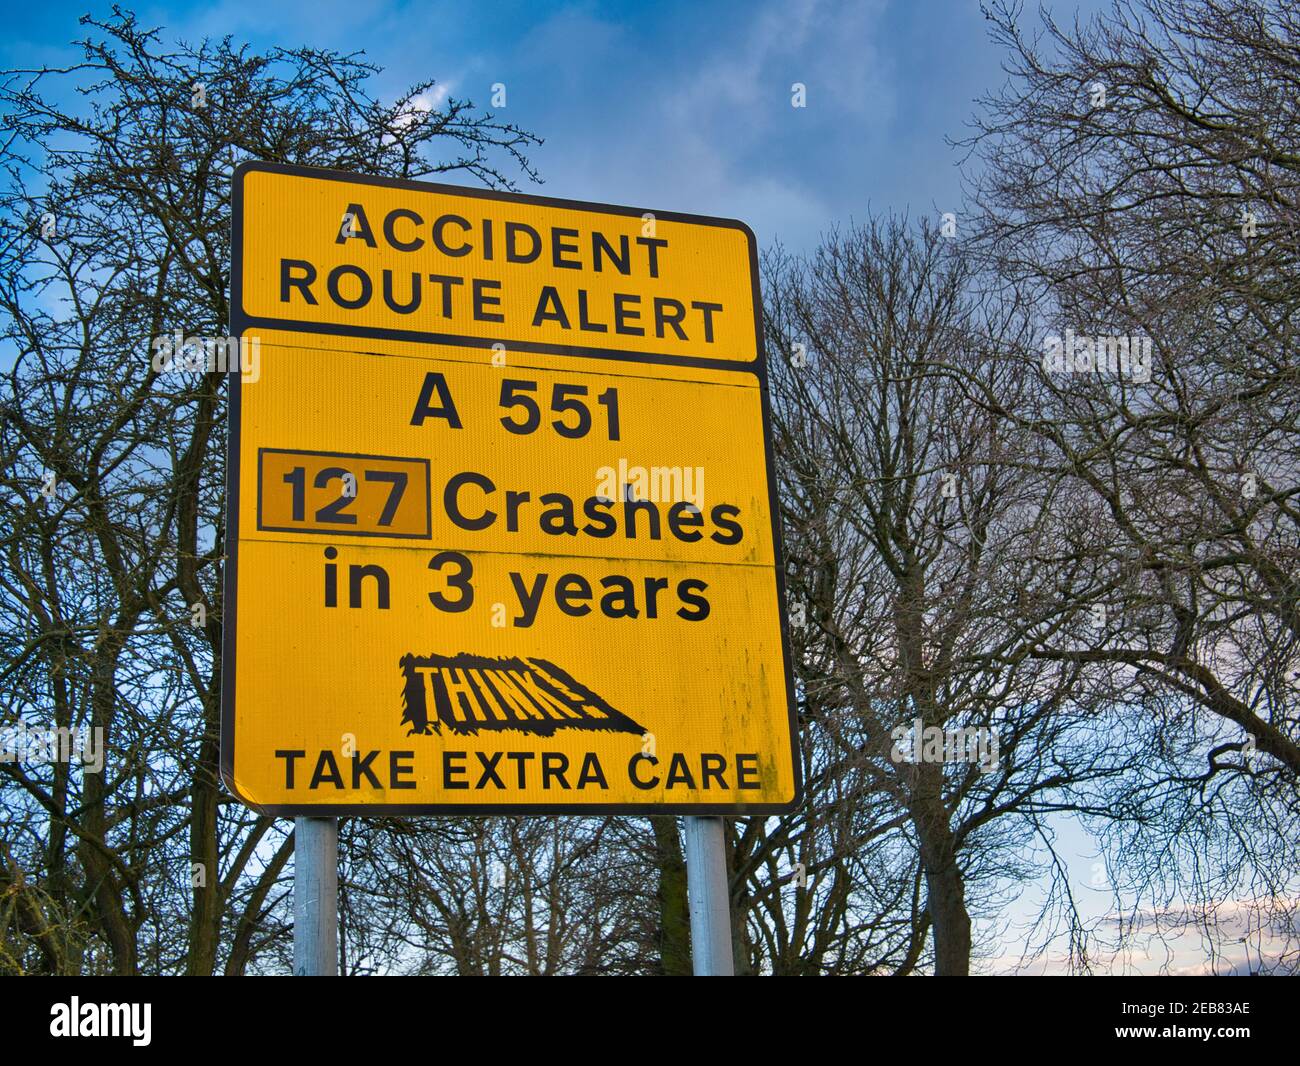 An accident route alert sign in the UK. The sign warns that drivers should take extra care on a stretch of road that has seen many accidents. The sign Stock Photo